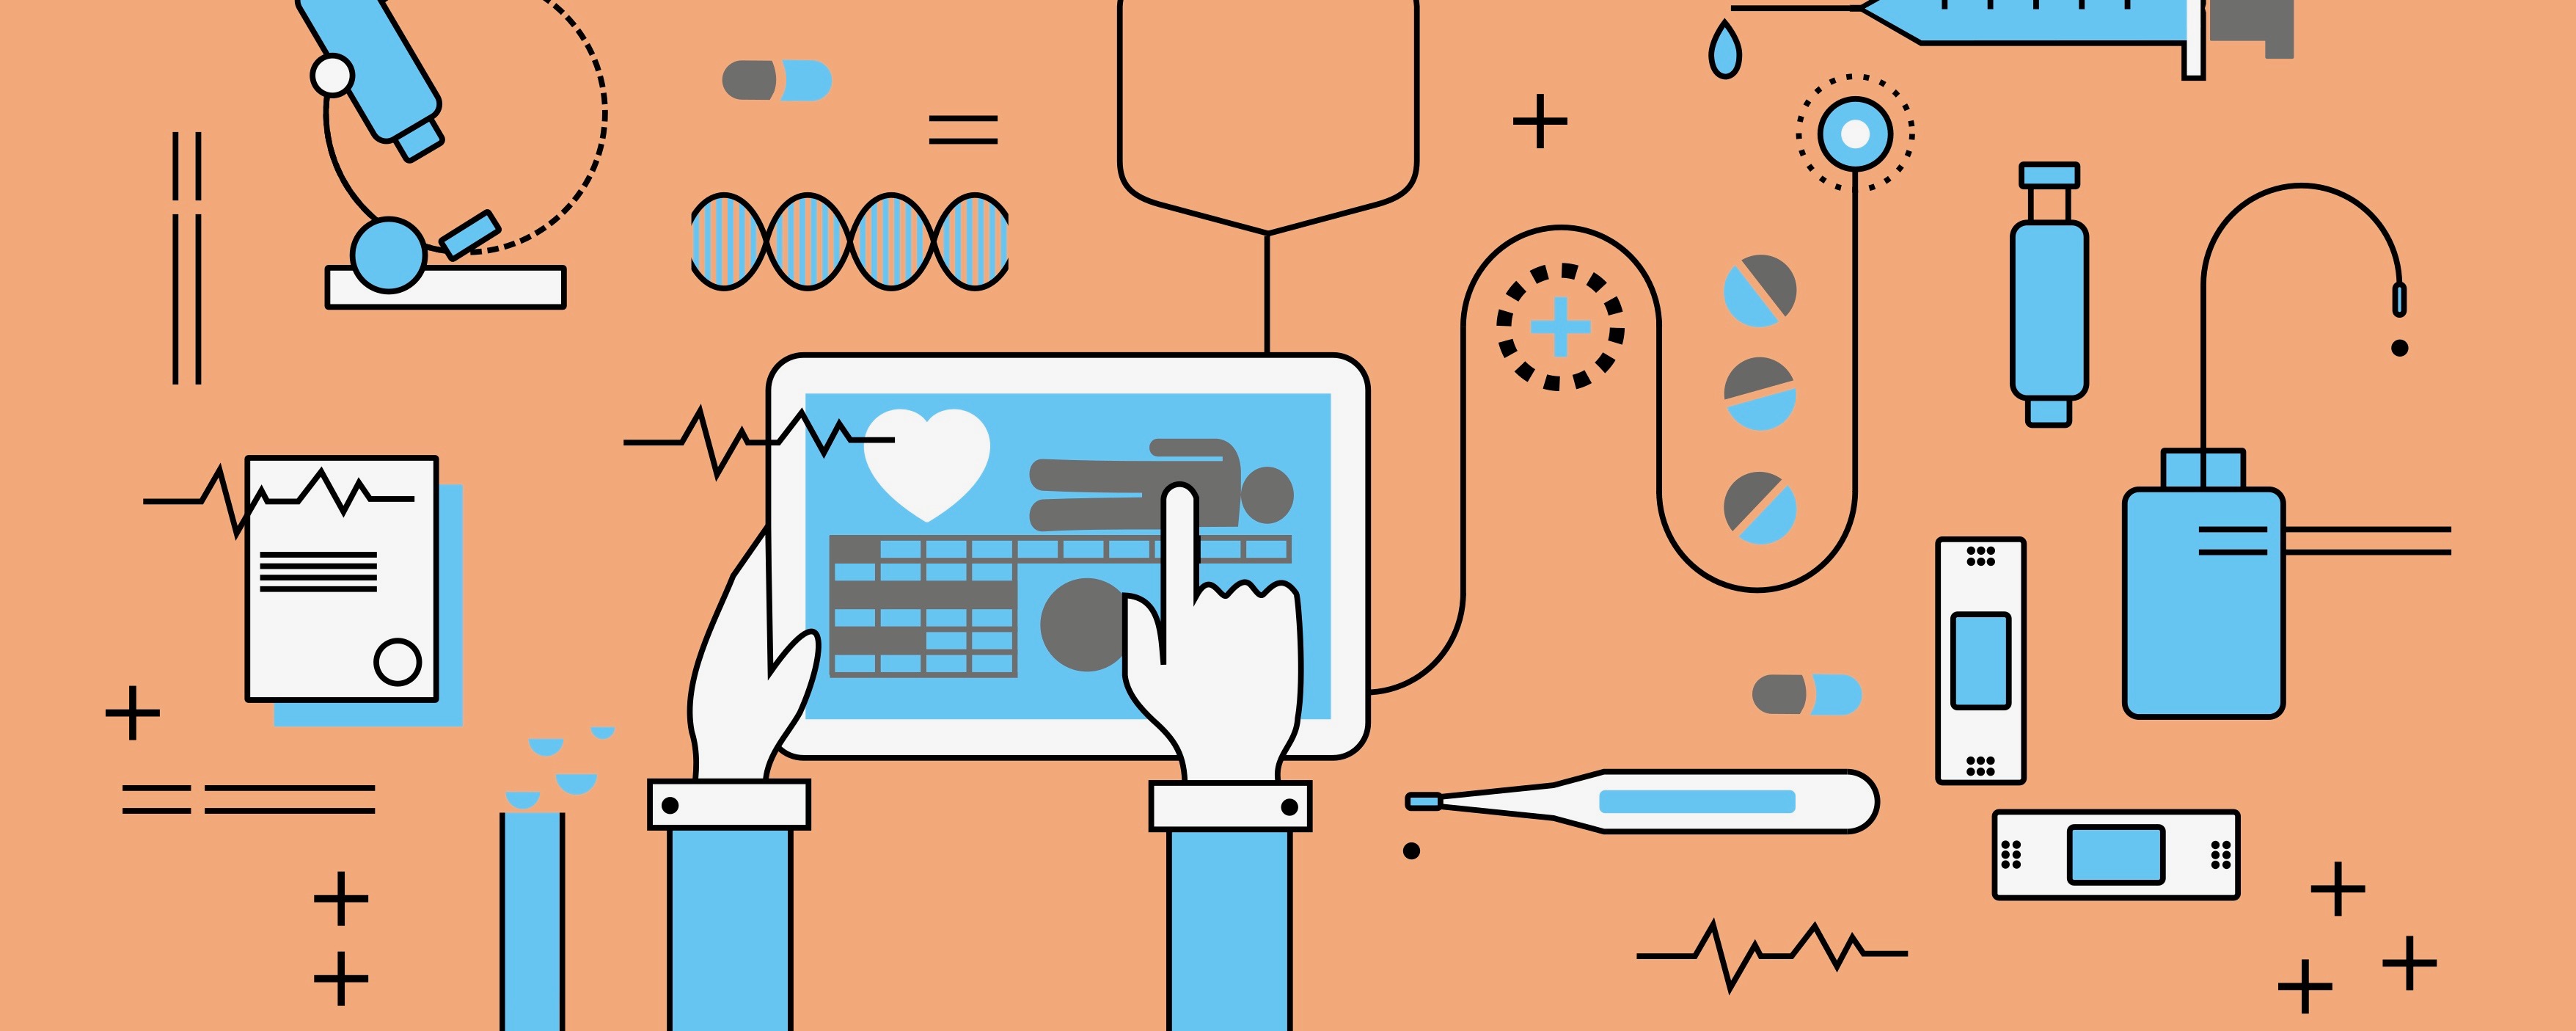 An illustration of futuristic healthcare technology depicting a handheld tablet, various biological instruments, waveforms, and medications.